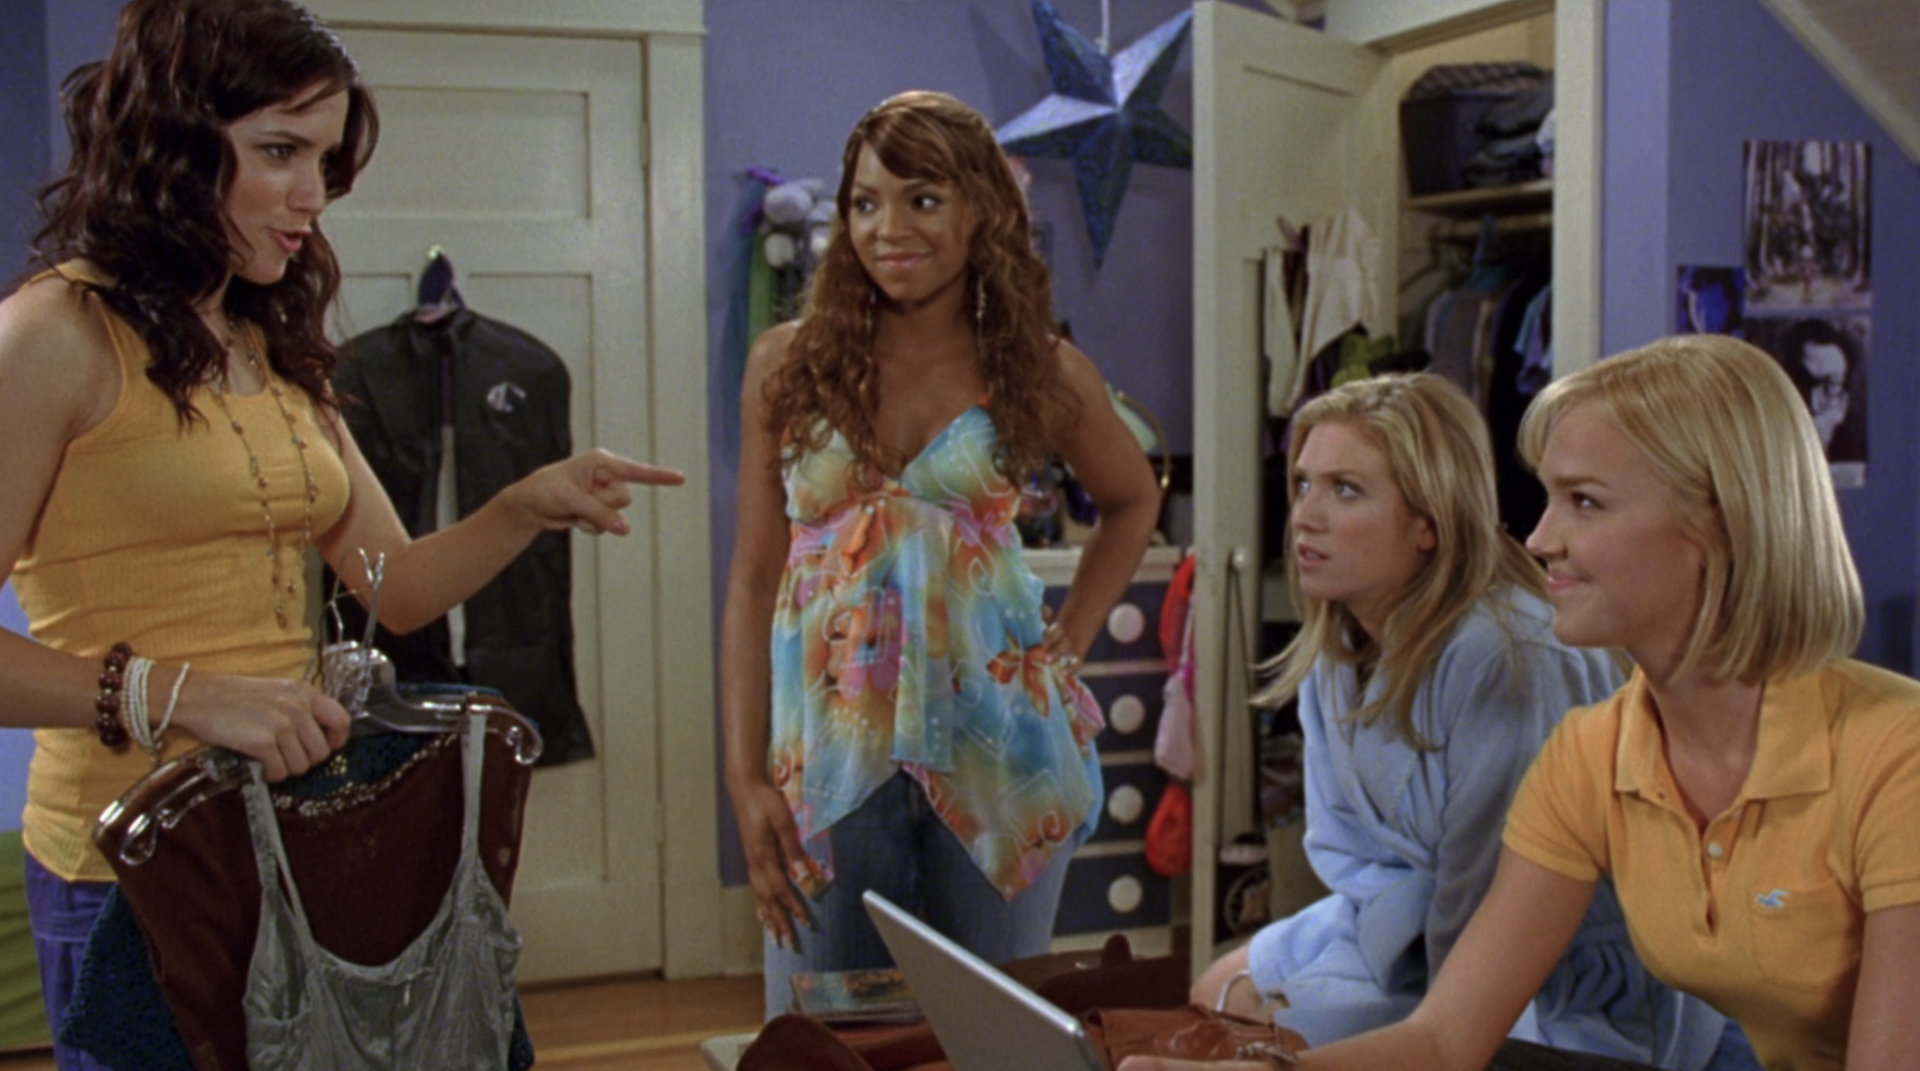 Sophia Bush, Ashanti, Brittany Snow and Arielle Kebell in &quot;John Tucker Must Die&quot;